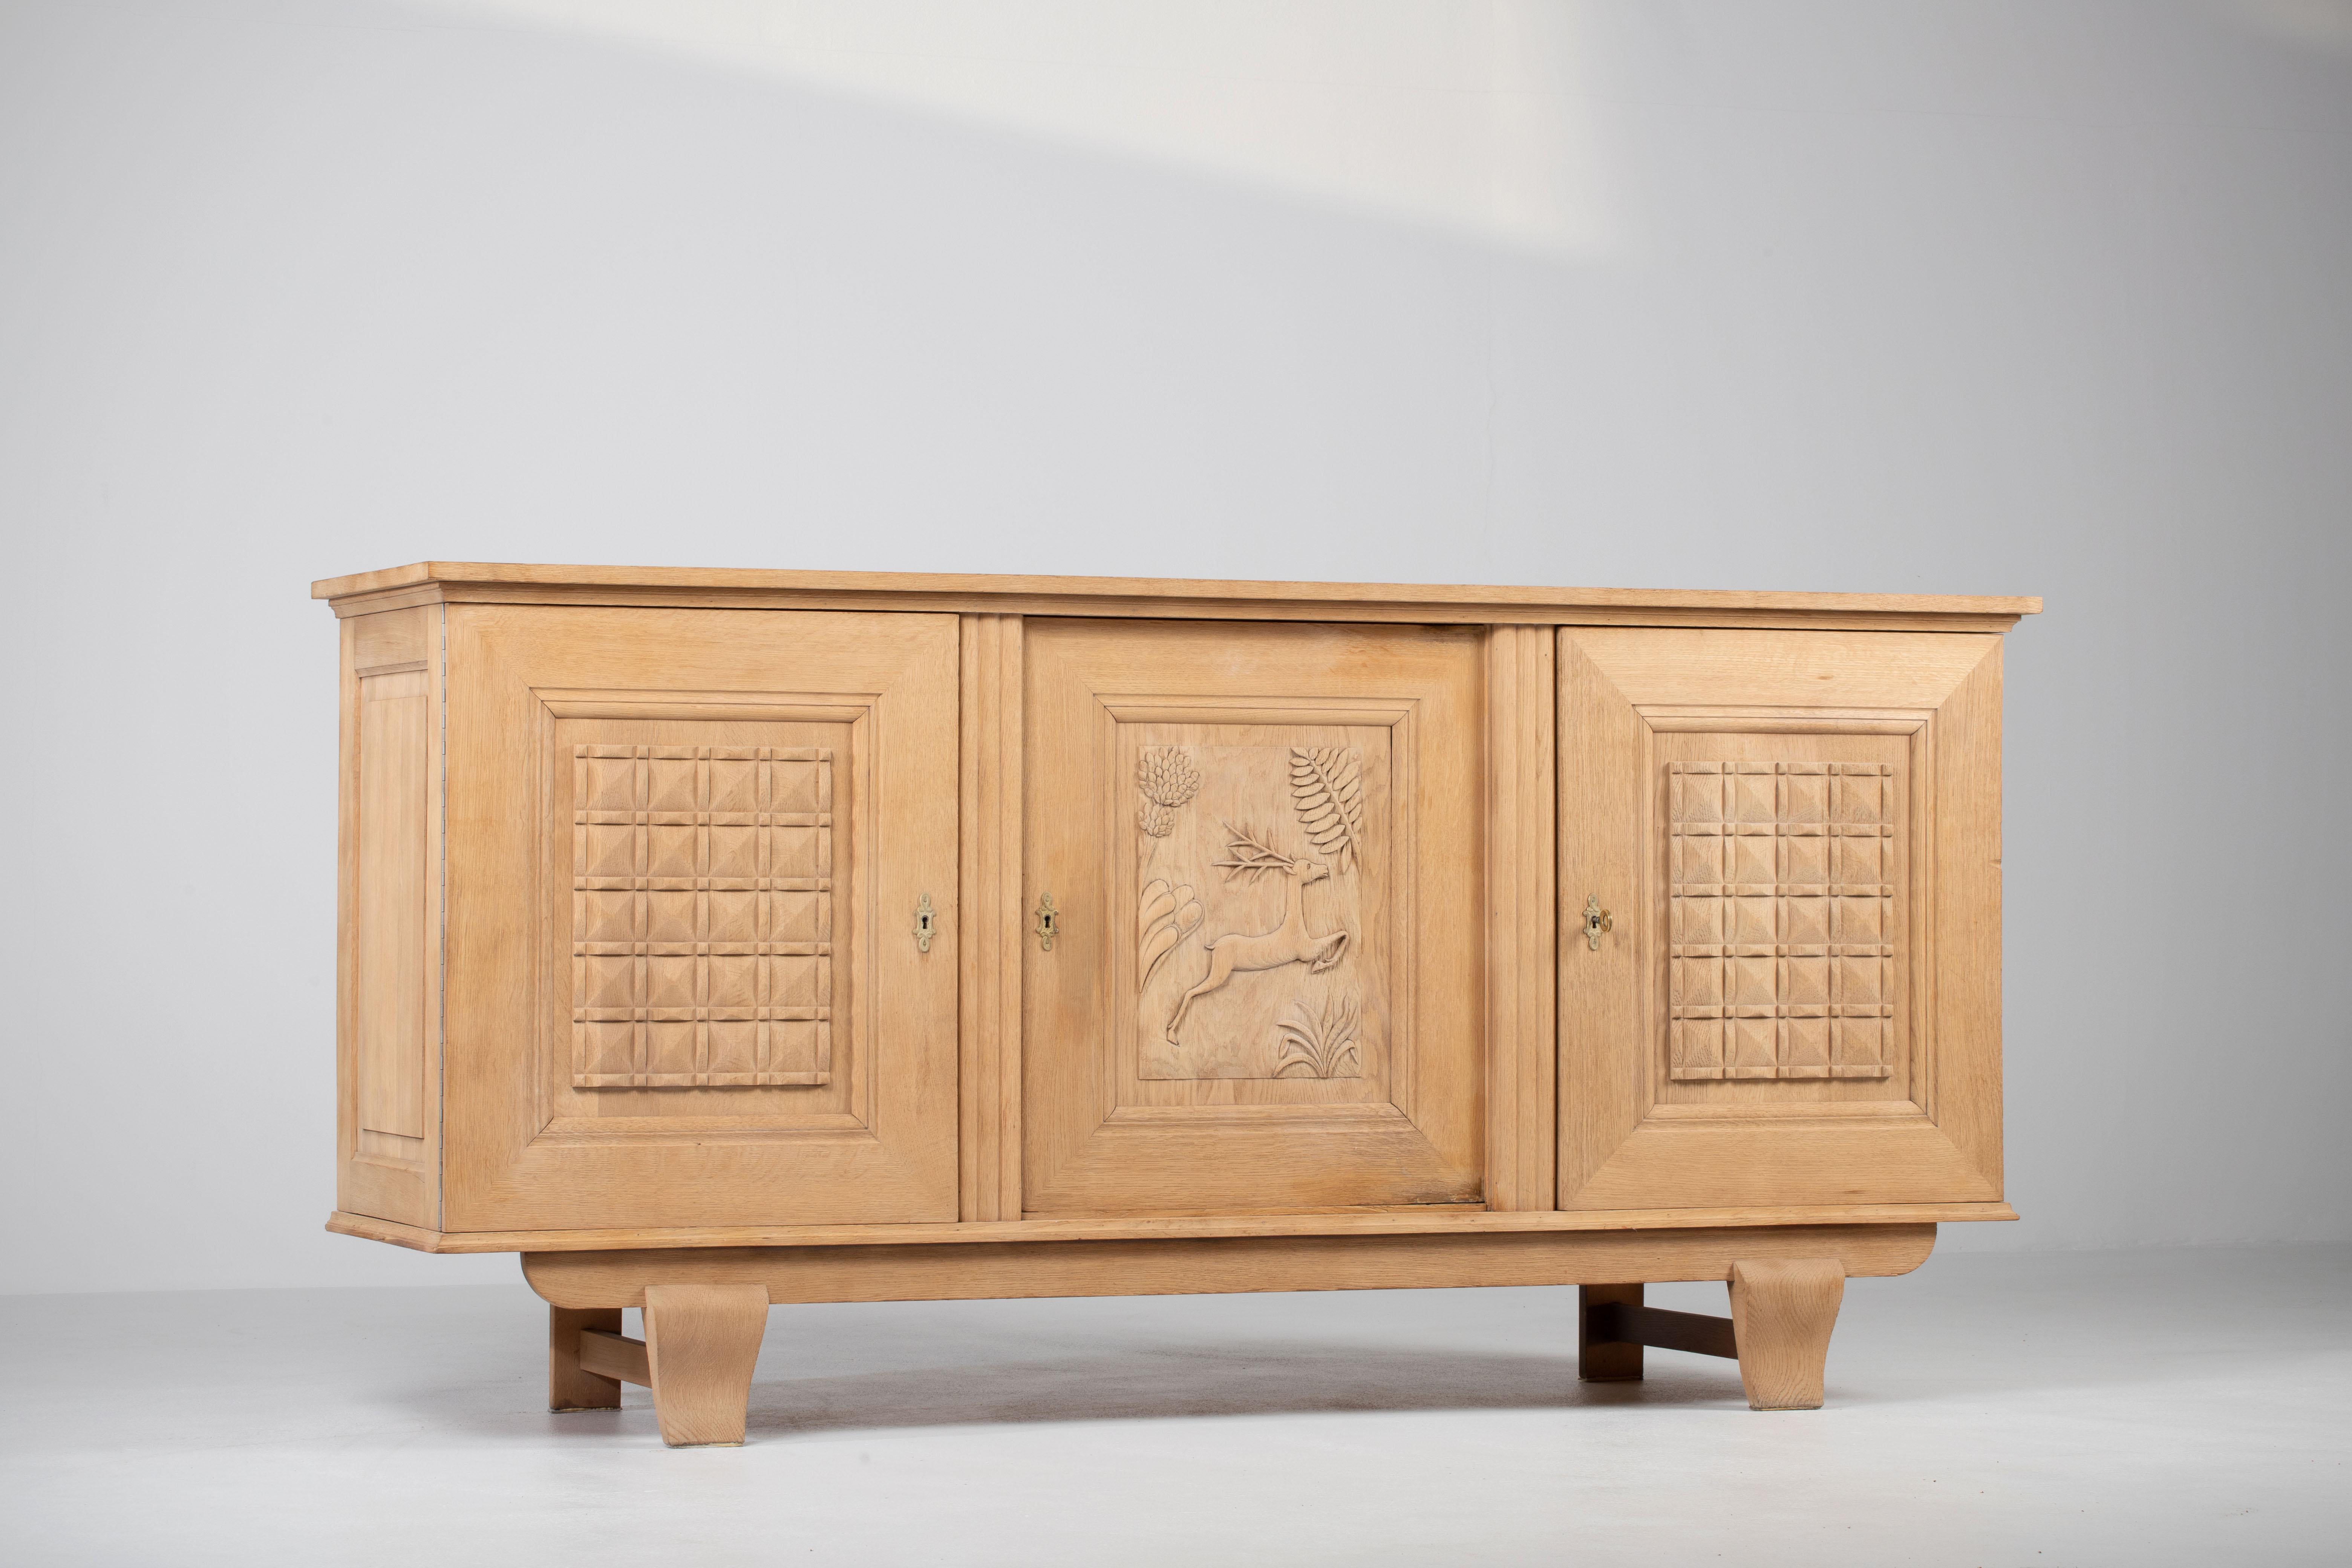 Hand-Carved Mid-Century Credenza in Solid Oak, Rustic, France, 1940s For Sale